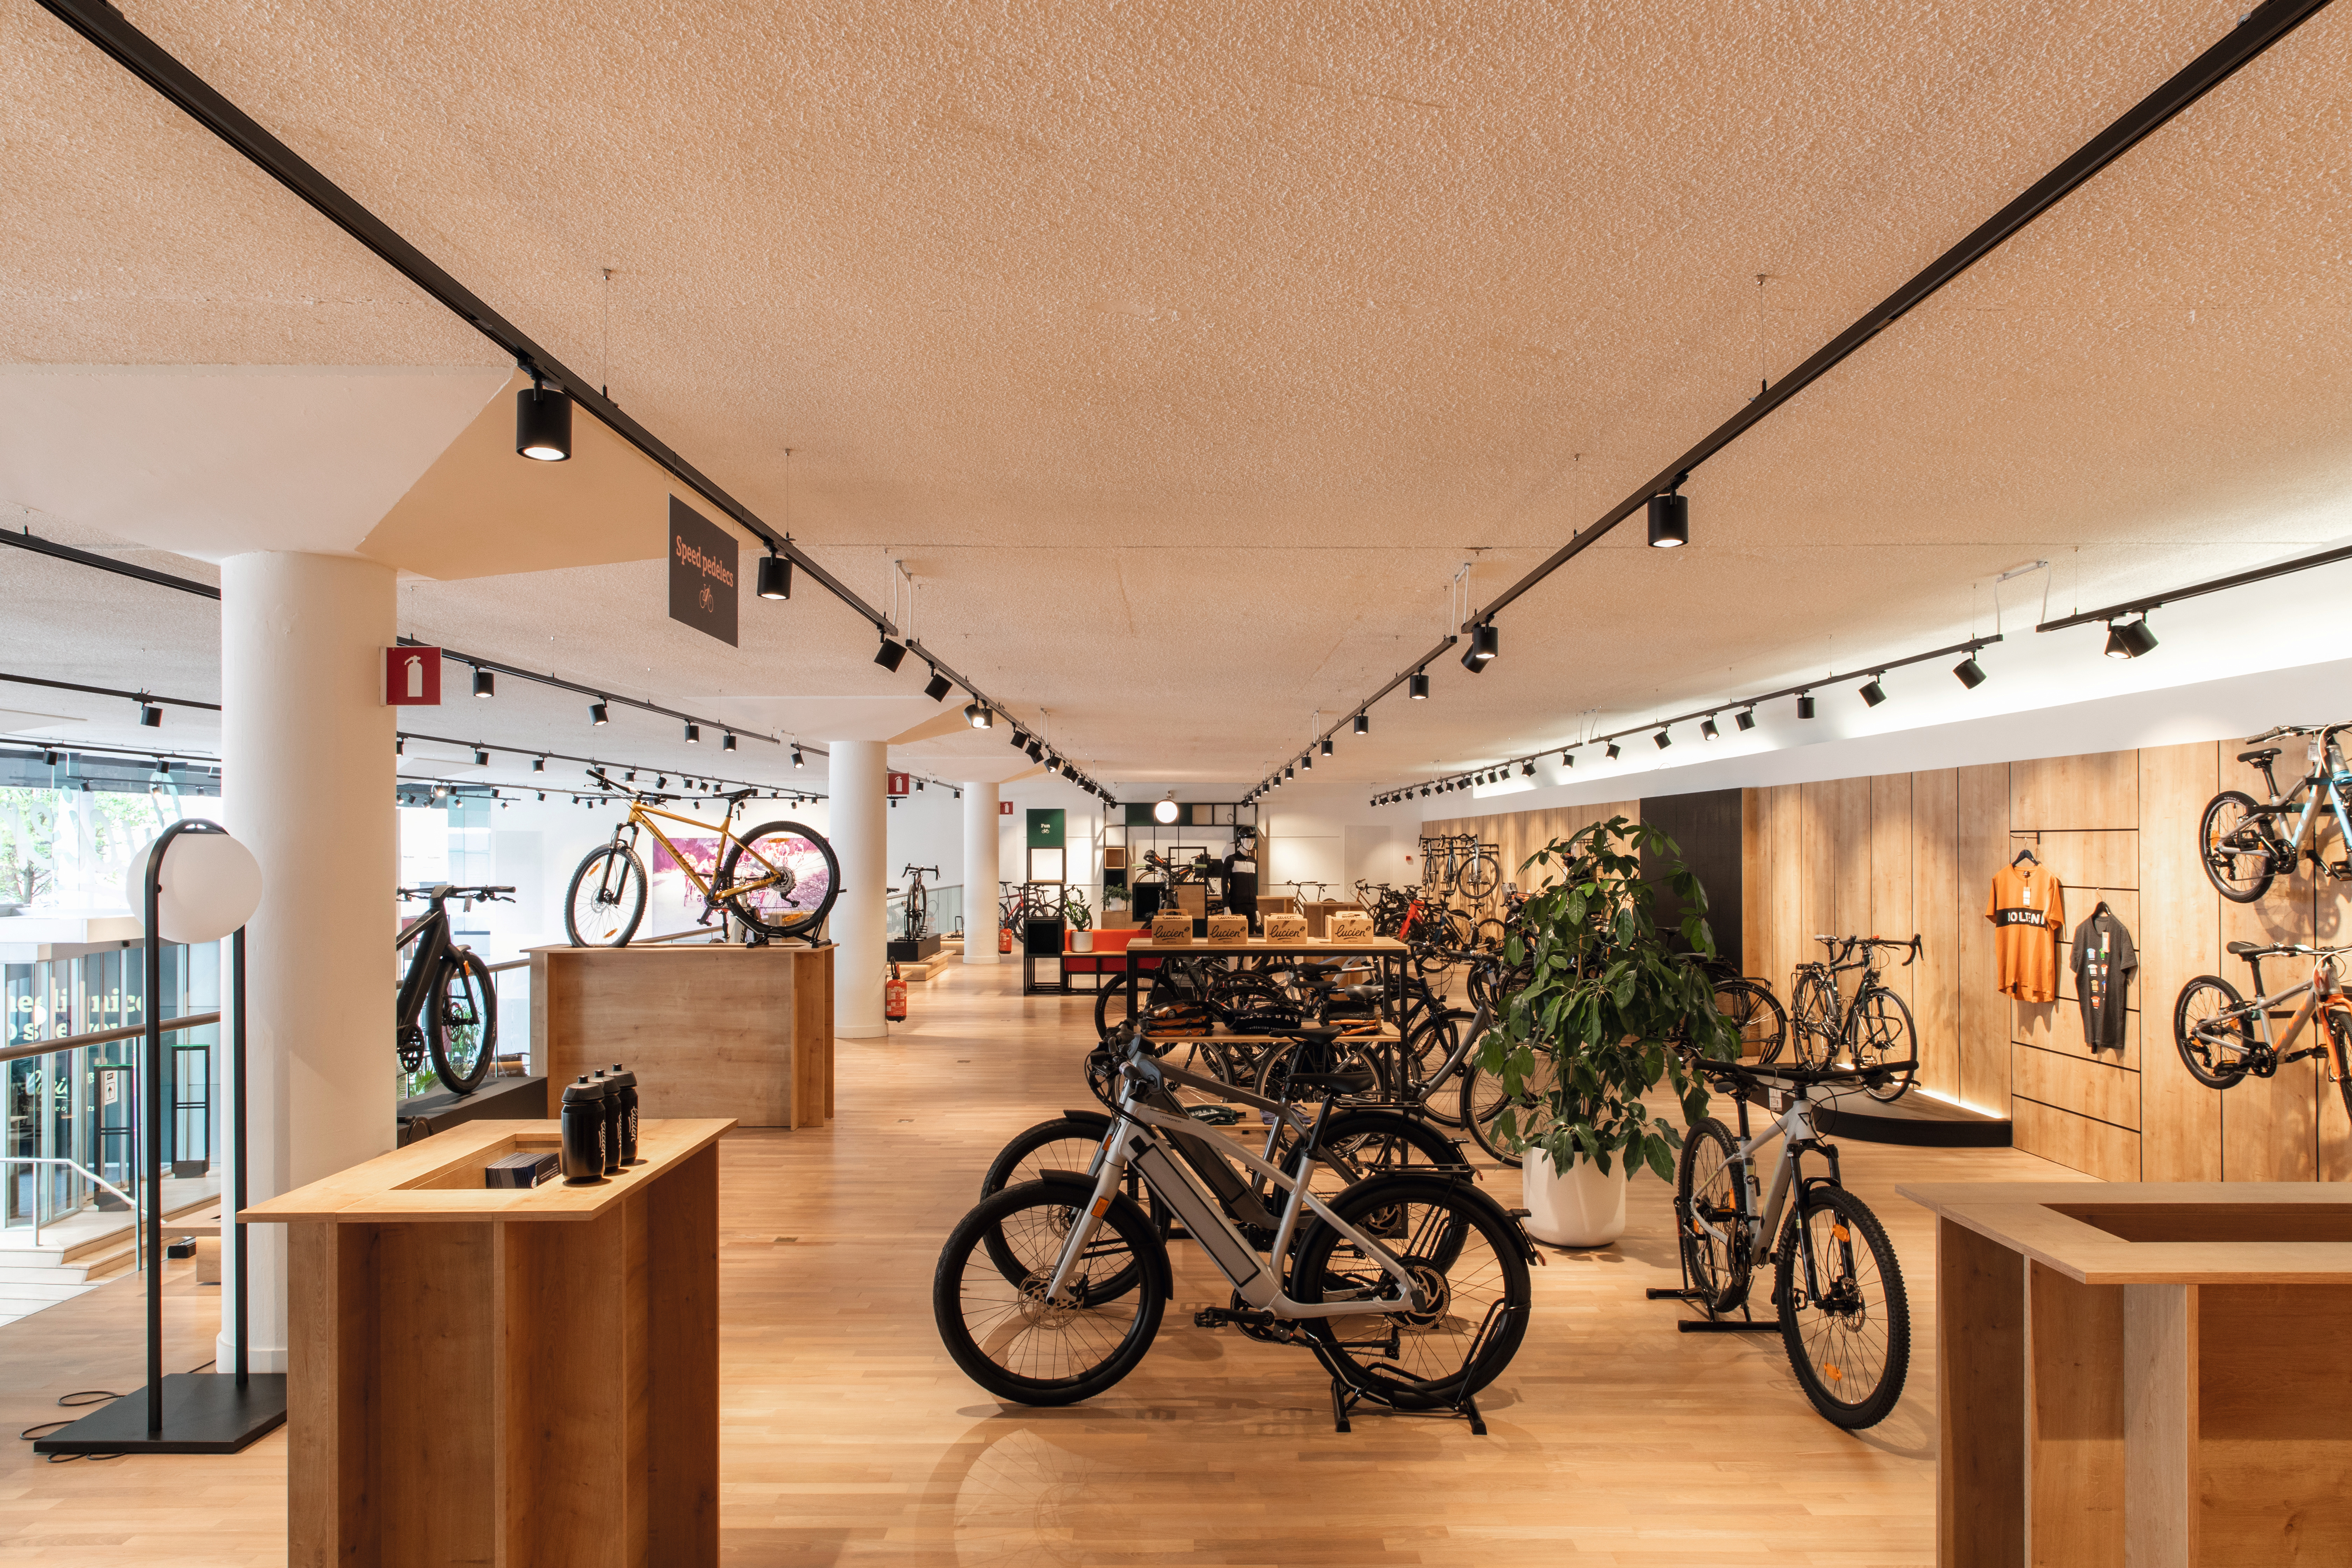 The shop is spread over two floors and offers a wide range of bicycles.